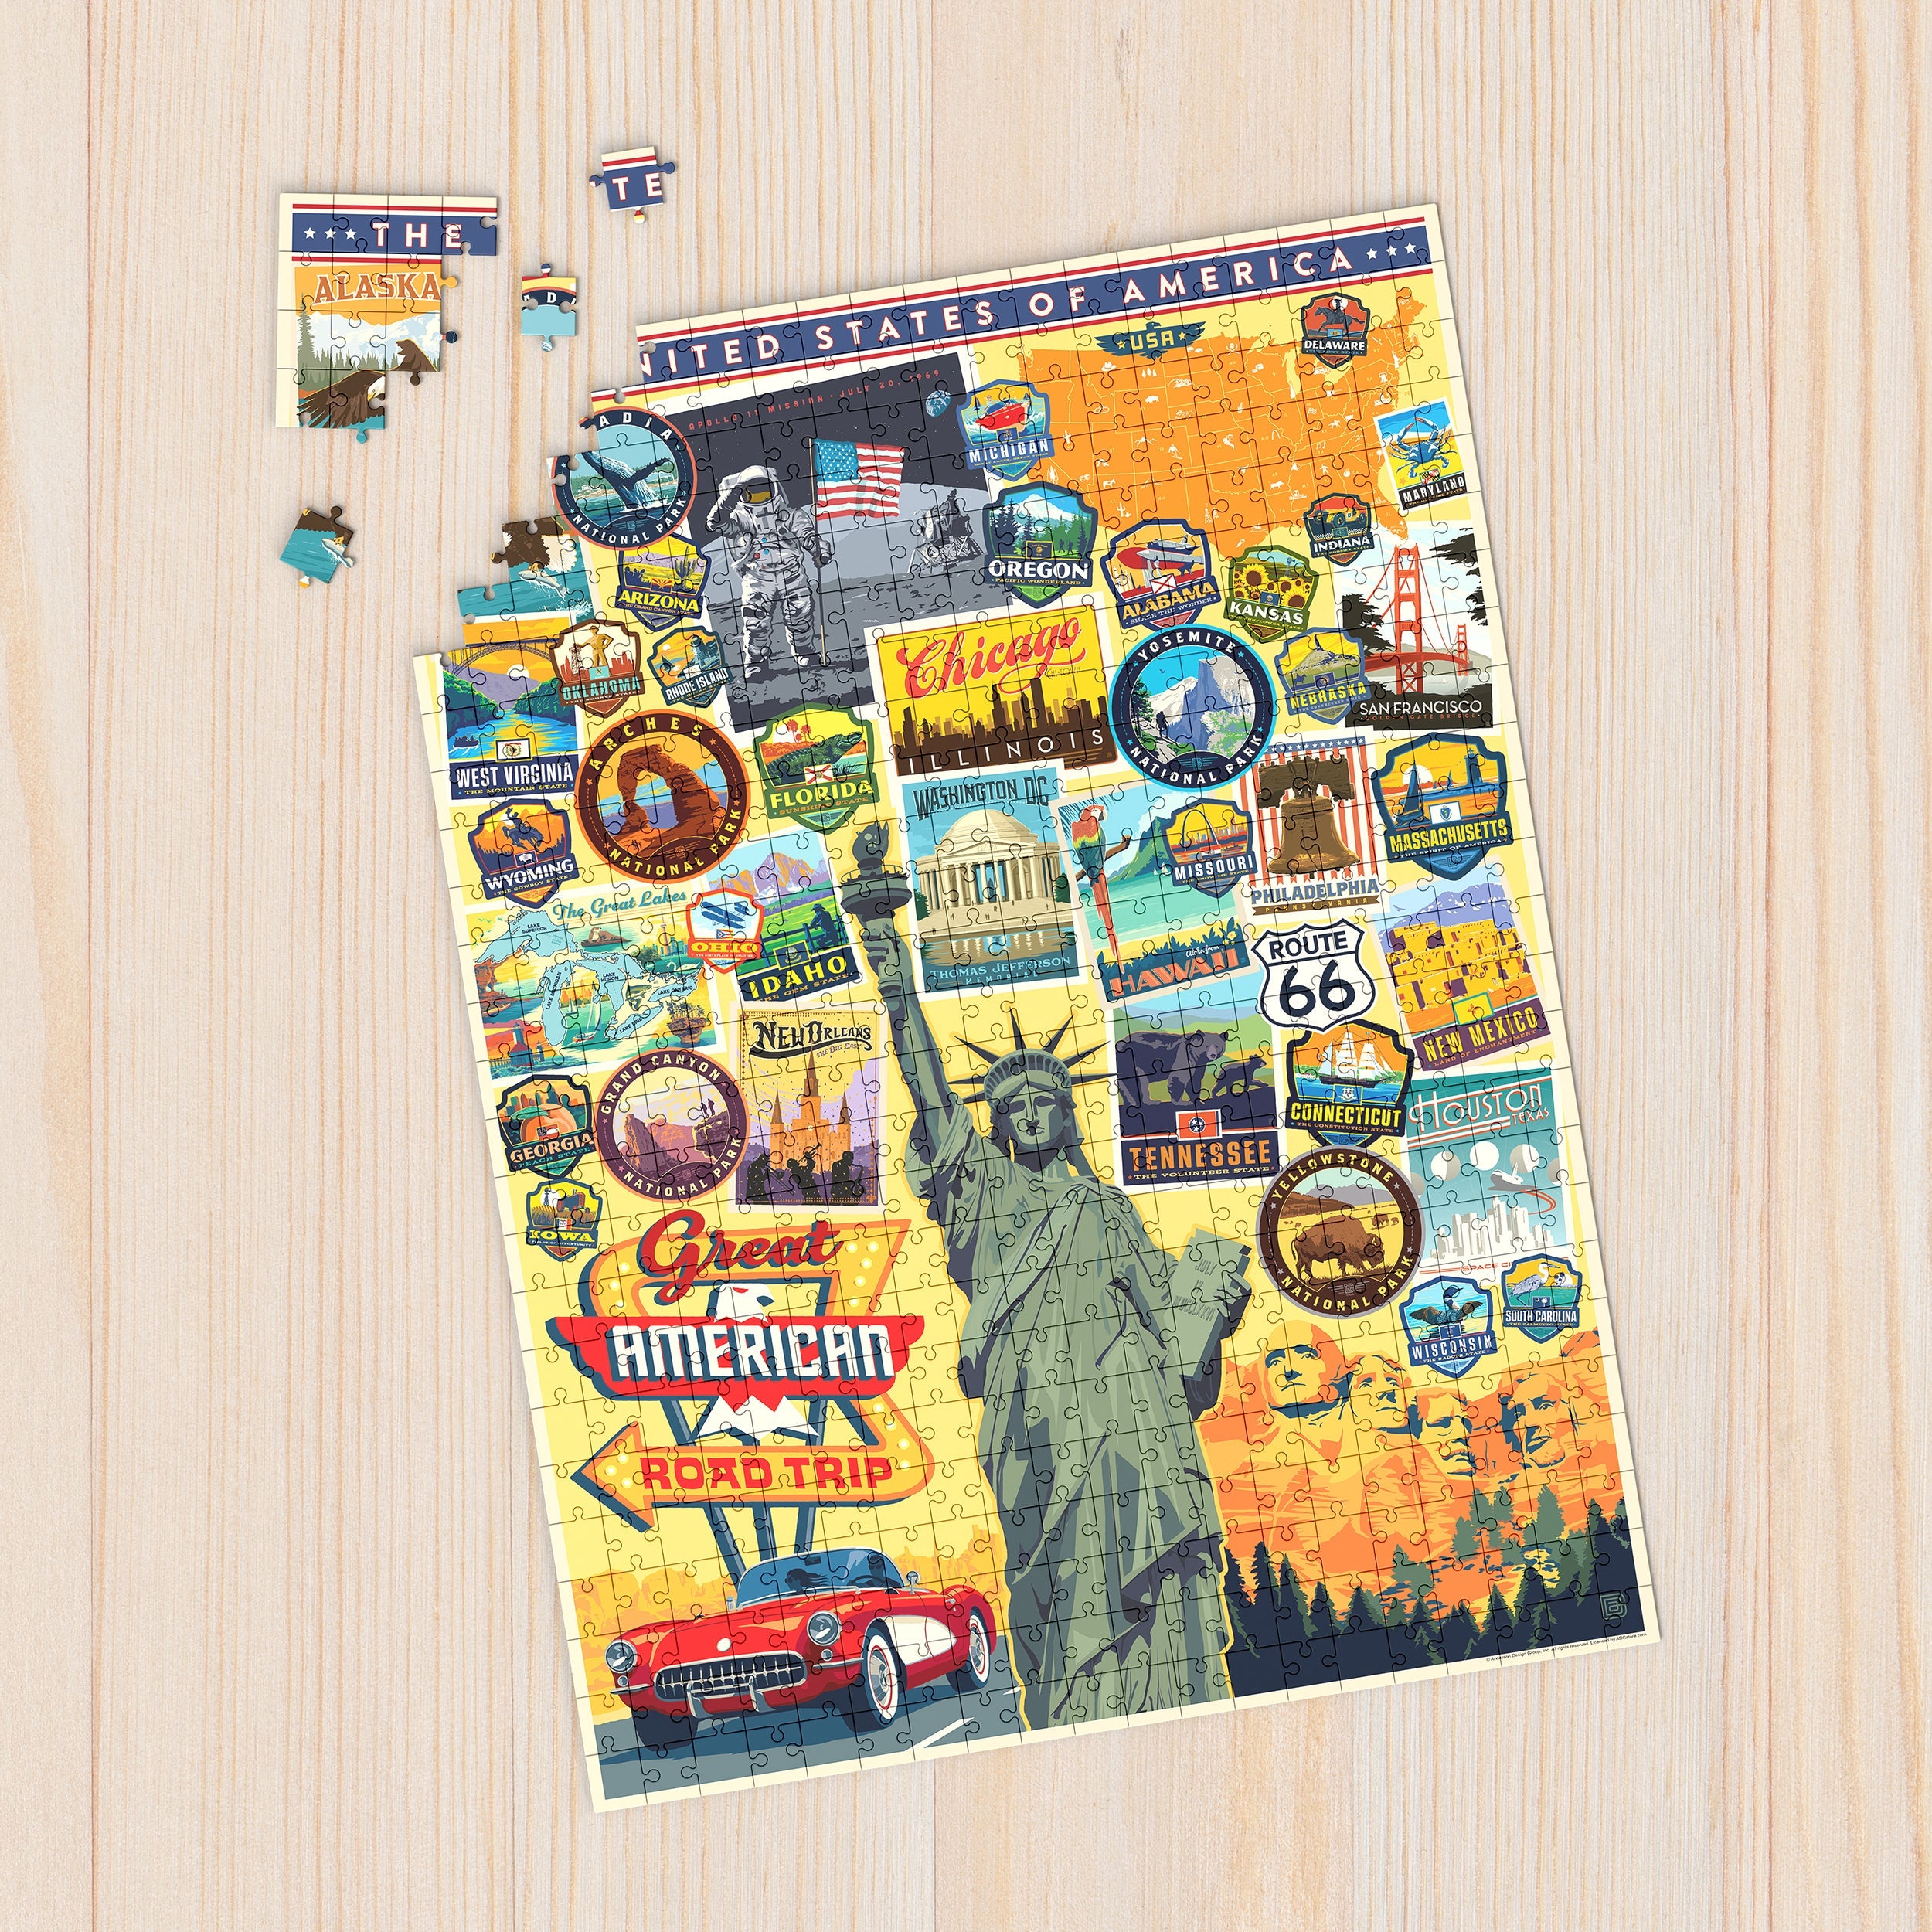 Great American Road Trip 1000 Piece - Jigsaw Puzzle